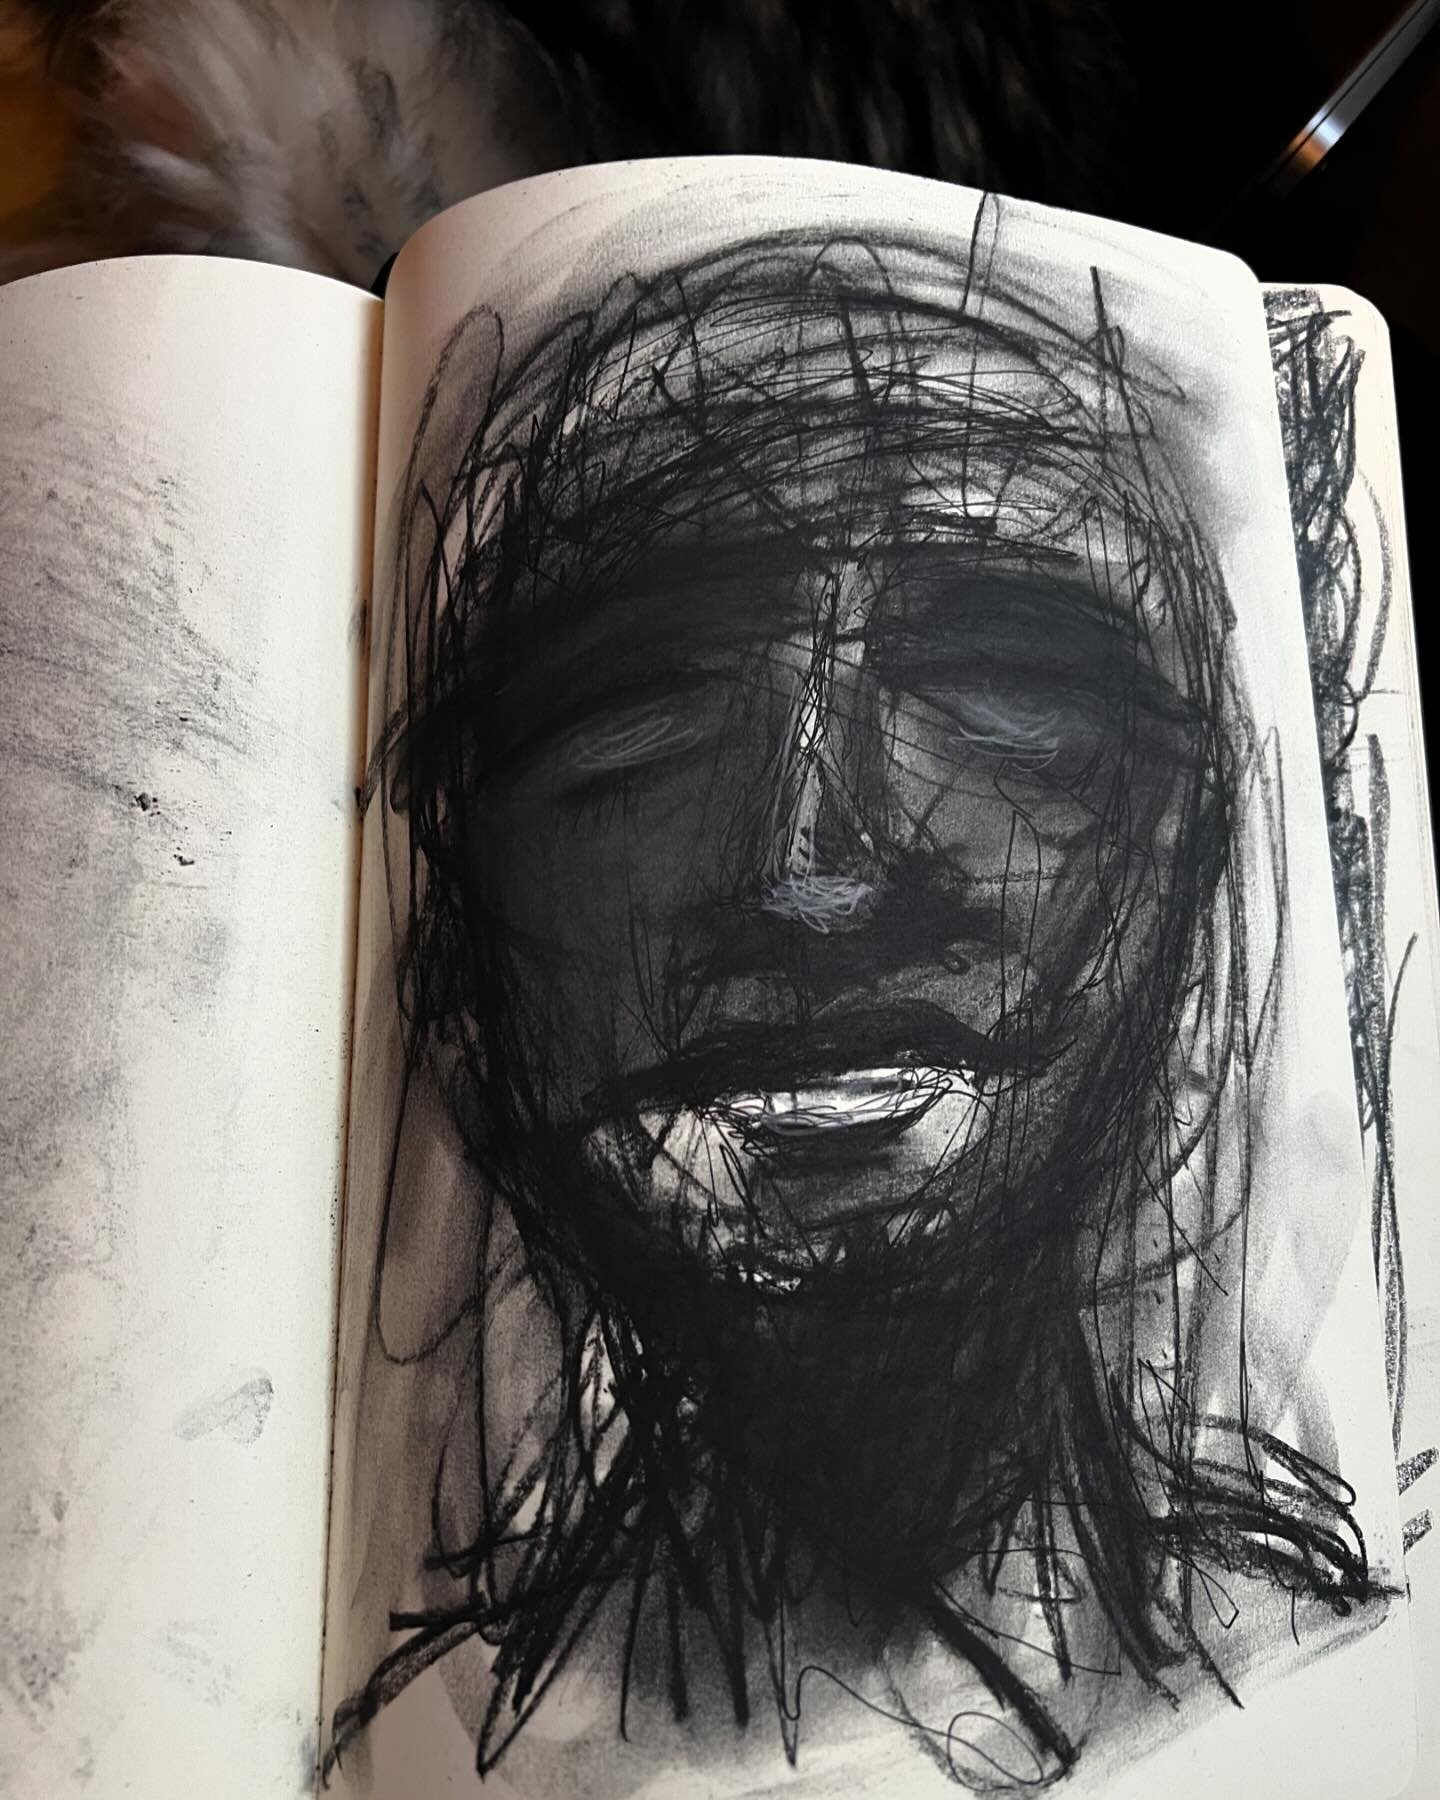 Faces made with charcoal